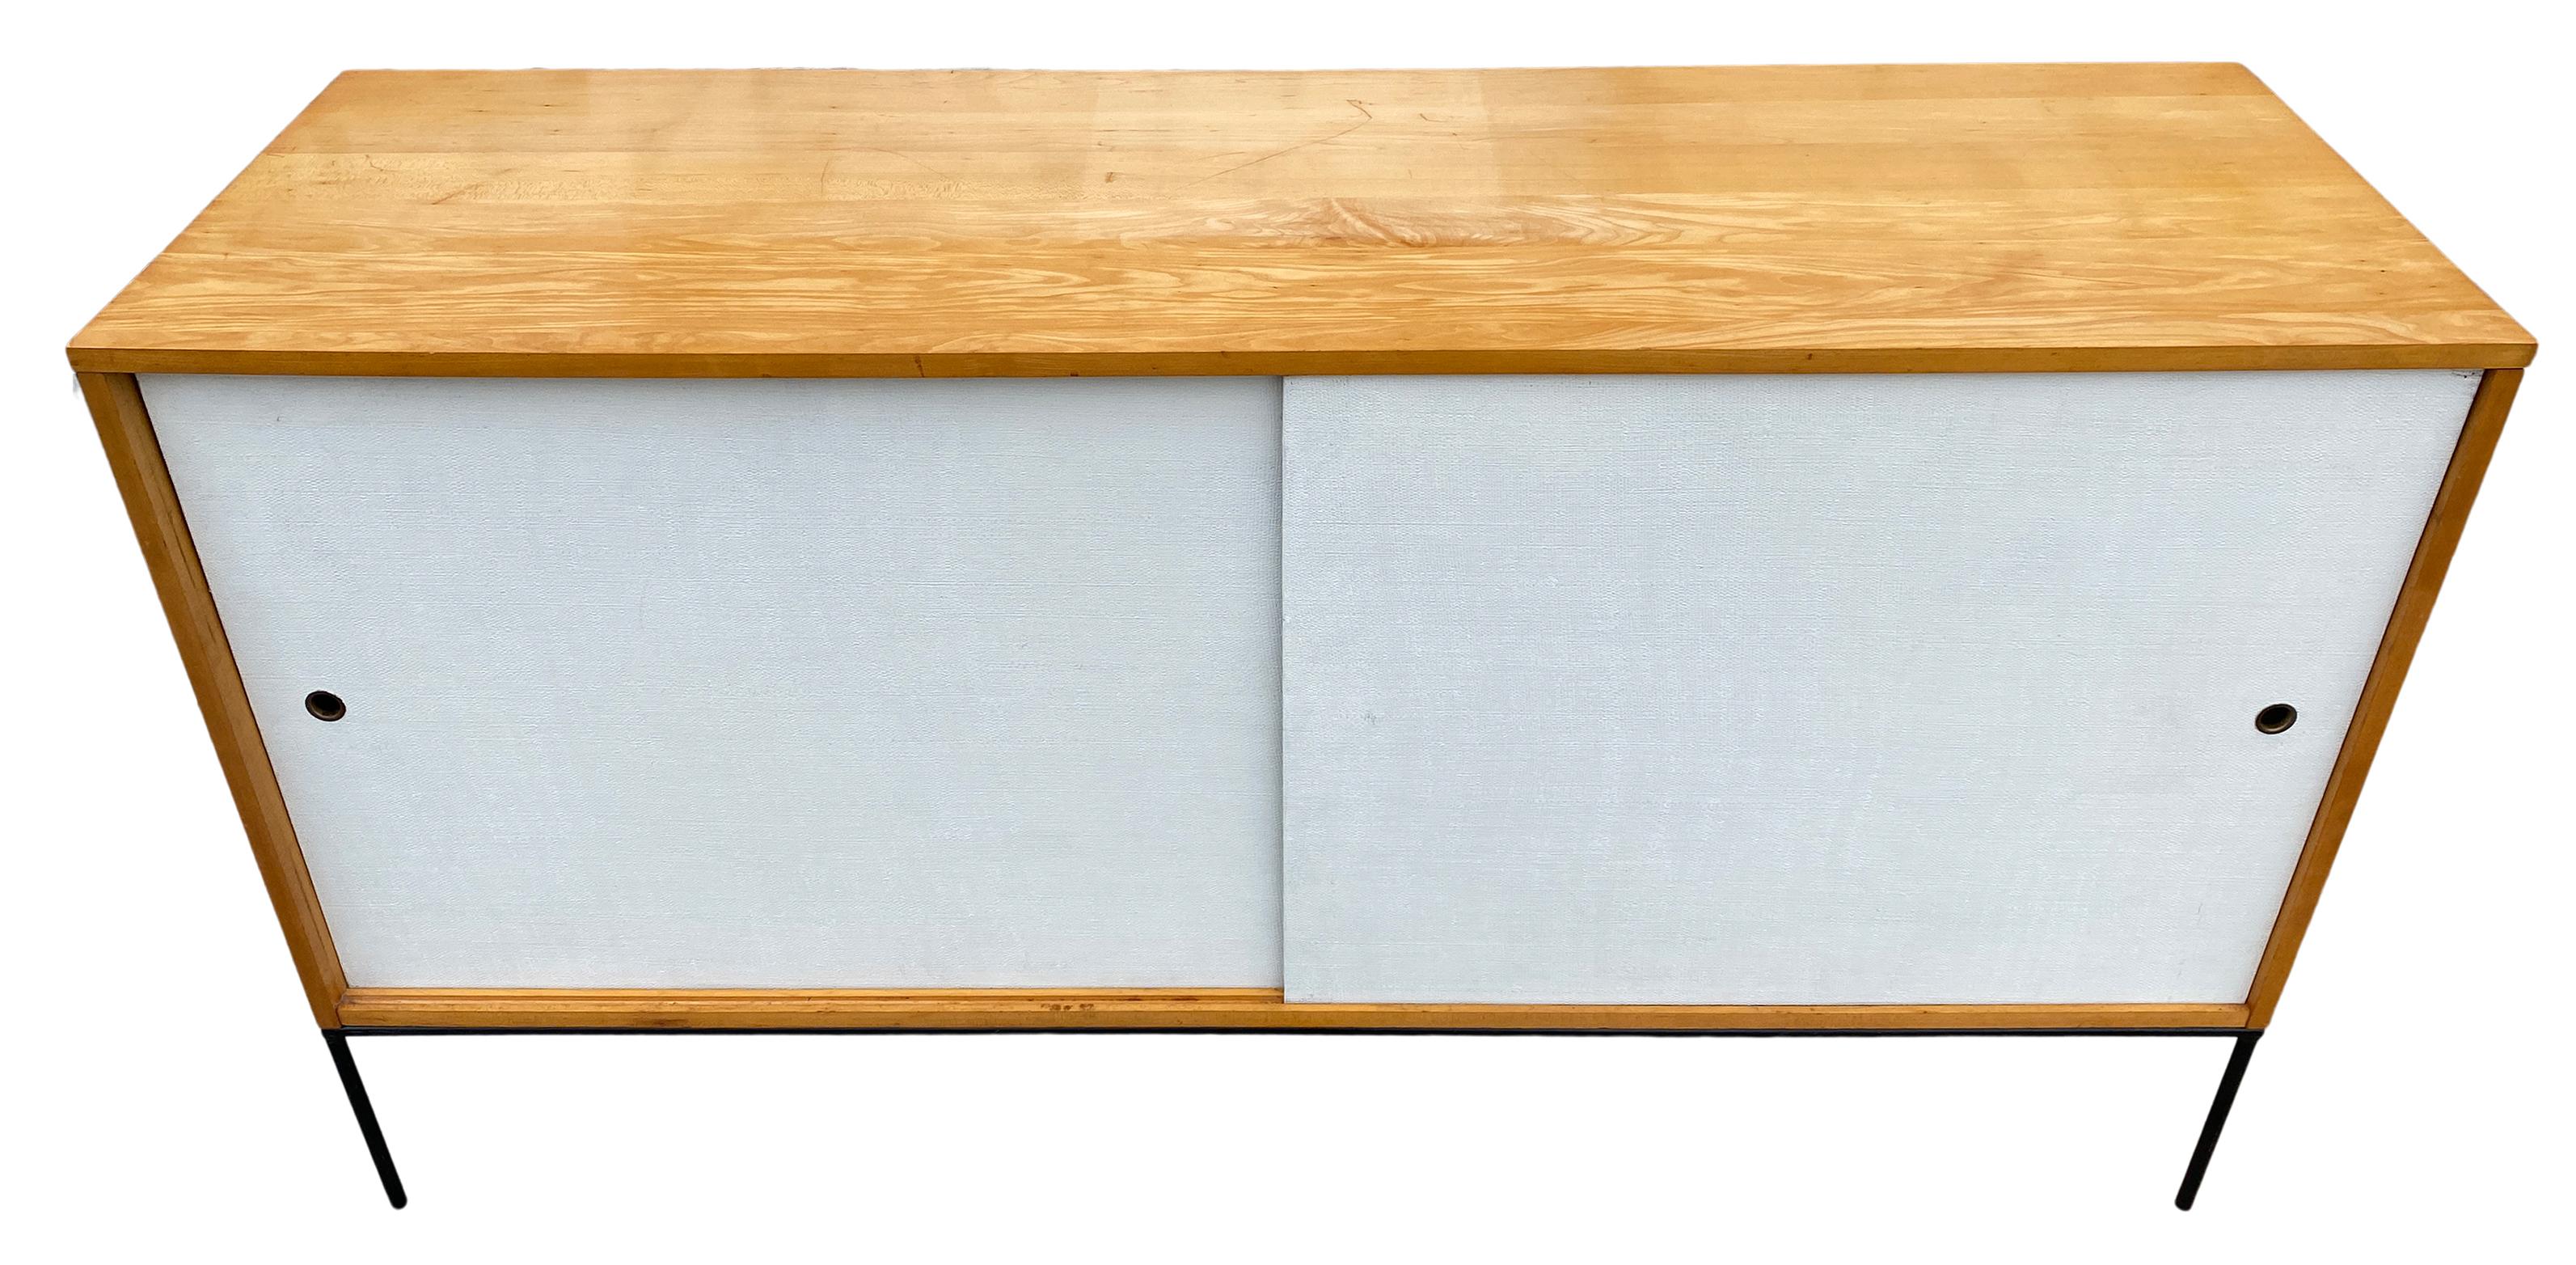 Beautiful clean midcentury tall credenza sideboard by Paul McCobb circa 1950 Planner Group #1514. Has 1 adjustable shelve with 4 pins with 1 drawer on the left side and 3 drawers on the right side. Solid maple construction with an original Raw